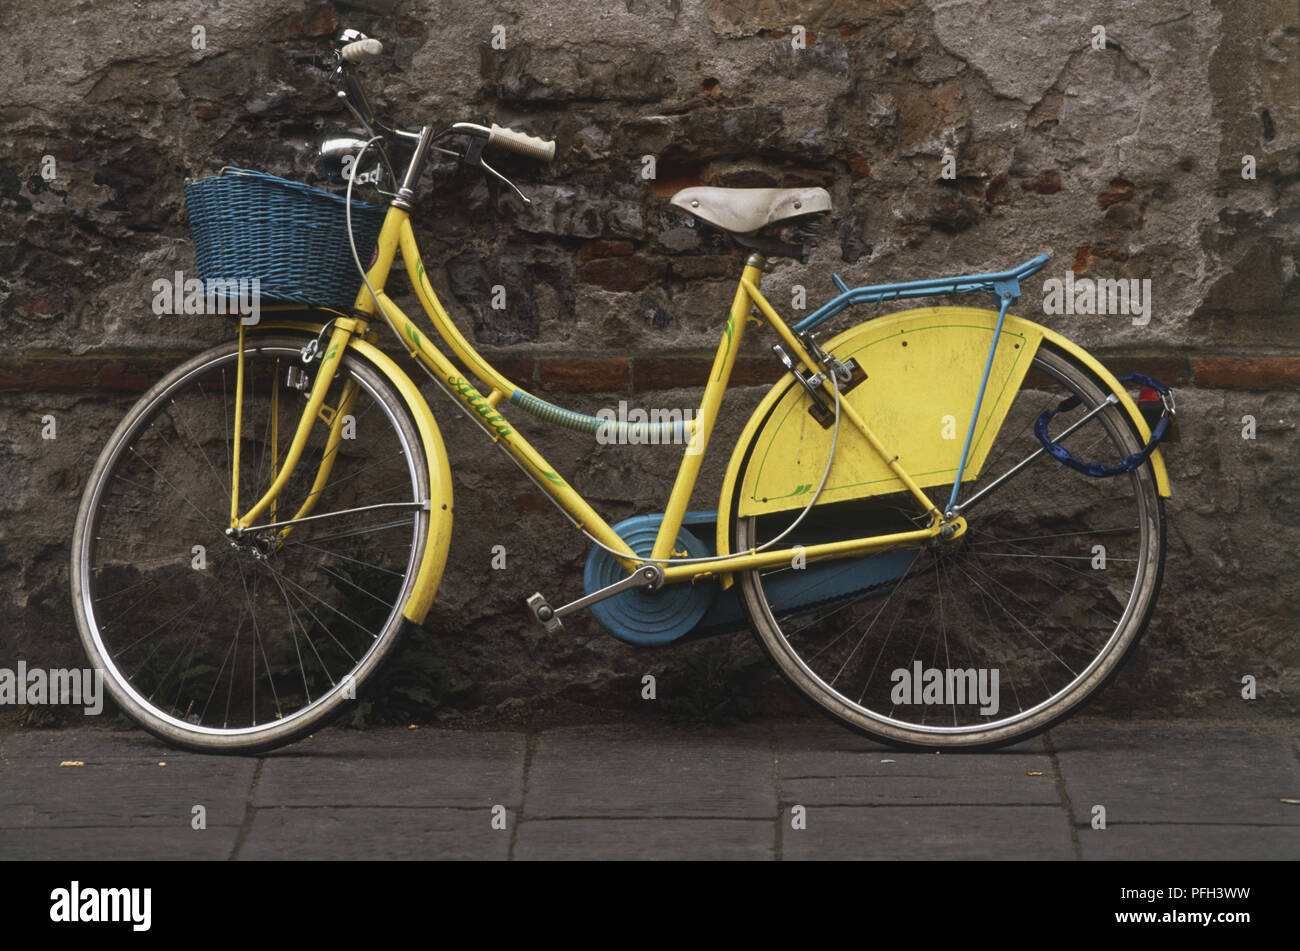 Yellow women's bicycle with a wicker basket mounted on front wheel, leaning against a weathered old wall Stock Photo